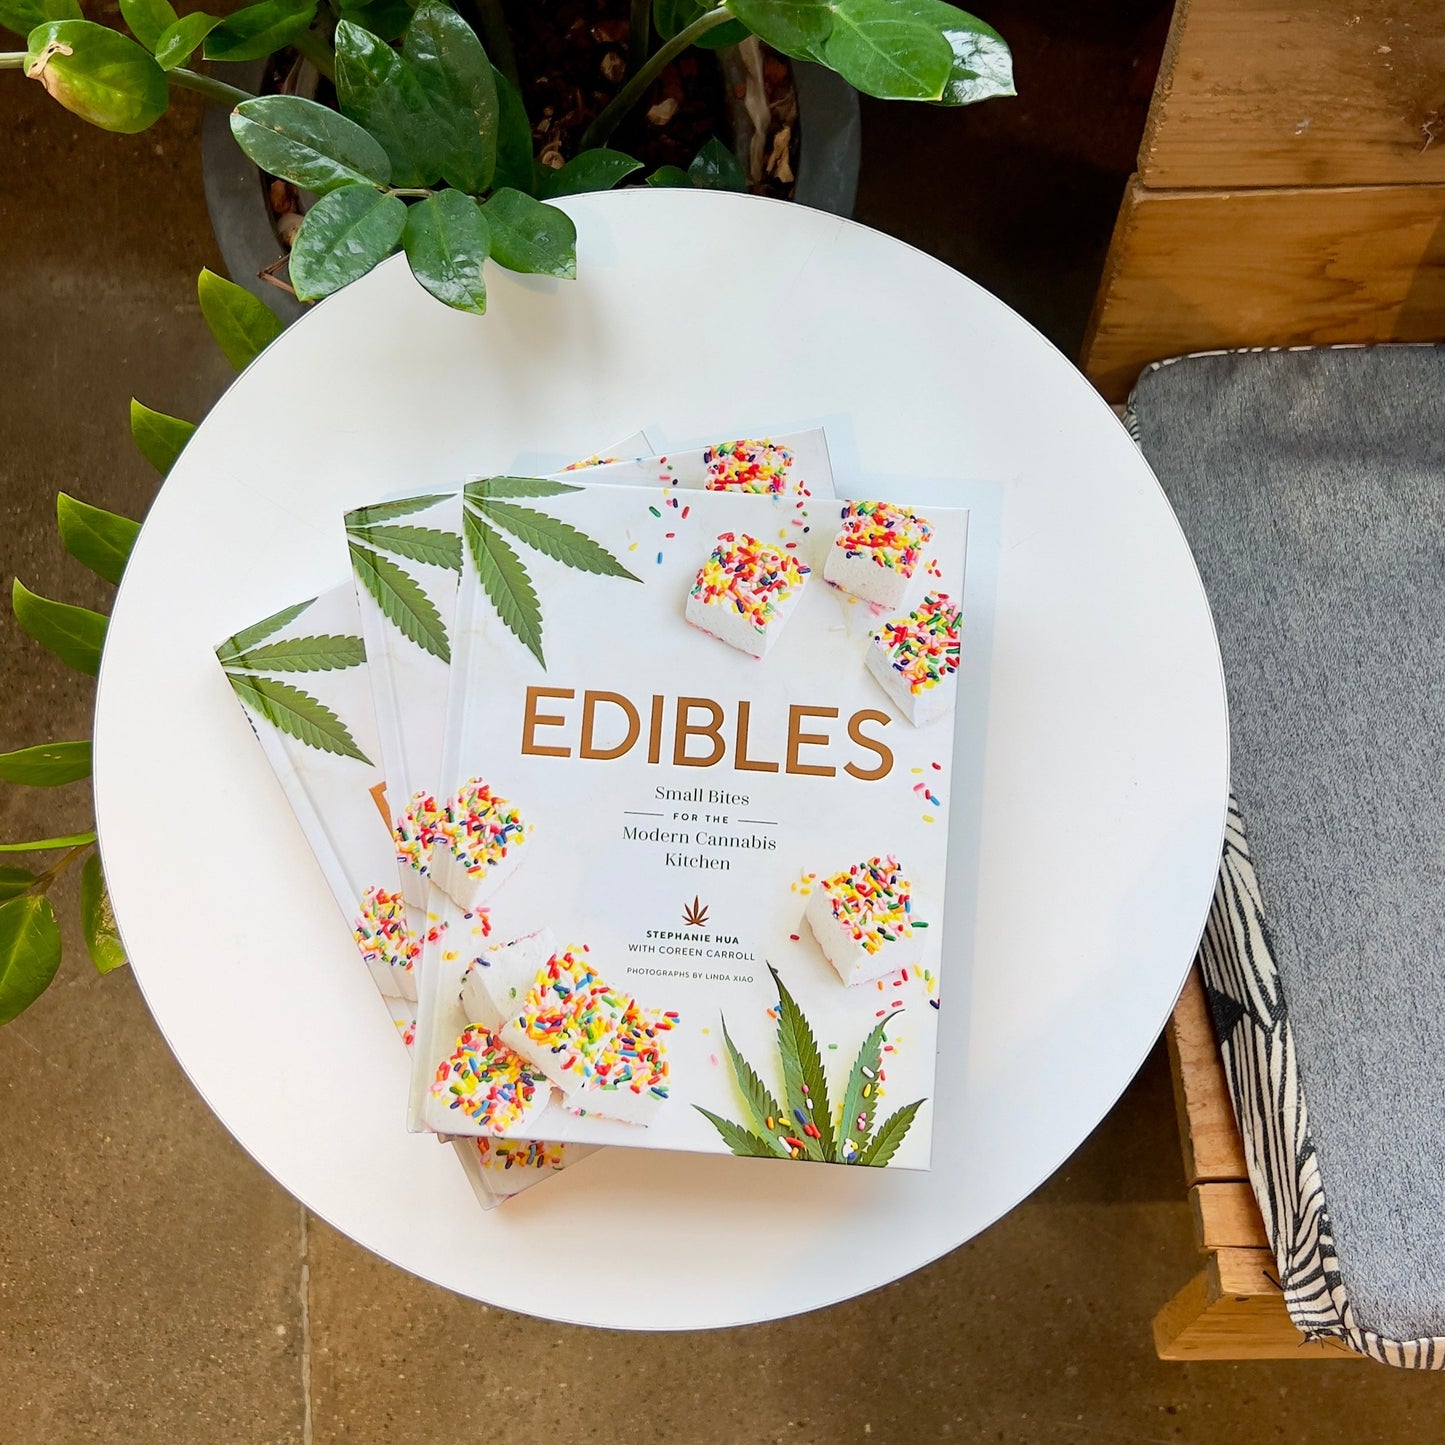 EDIBLES- Small Bites for the Modern Cannabis Kitchen